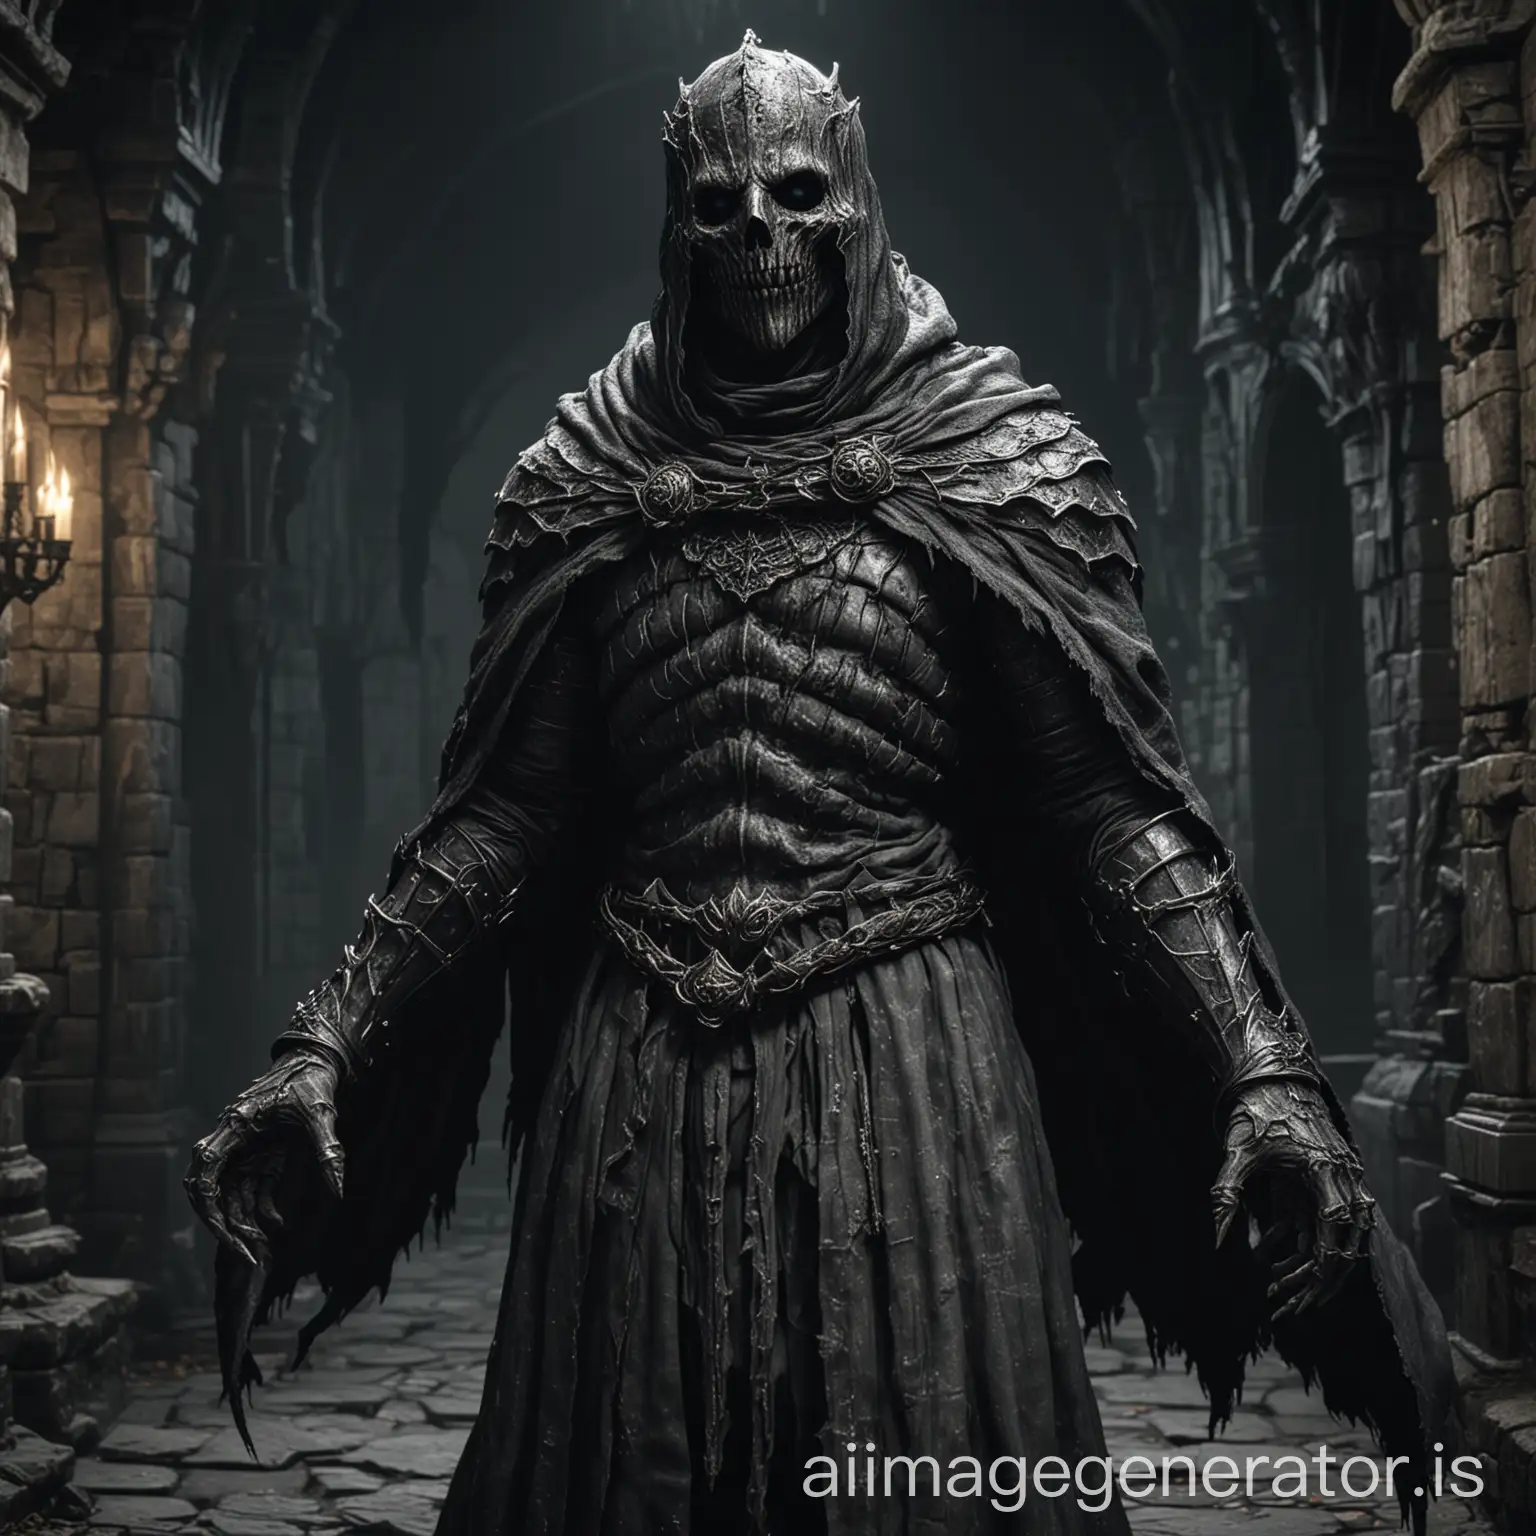 Realistic, up close full body, dark souls 3 creature, lesser undead, terrifying deformed appearance, night, castle interior, black and silver robes